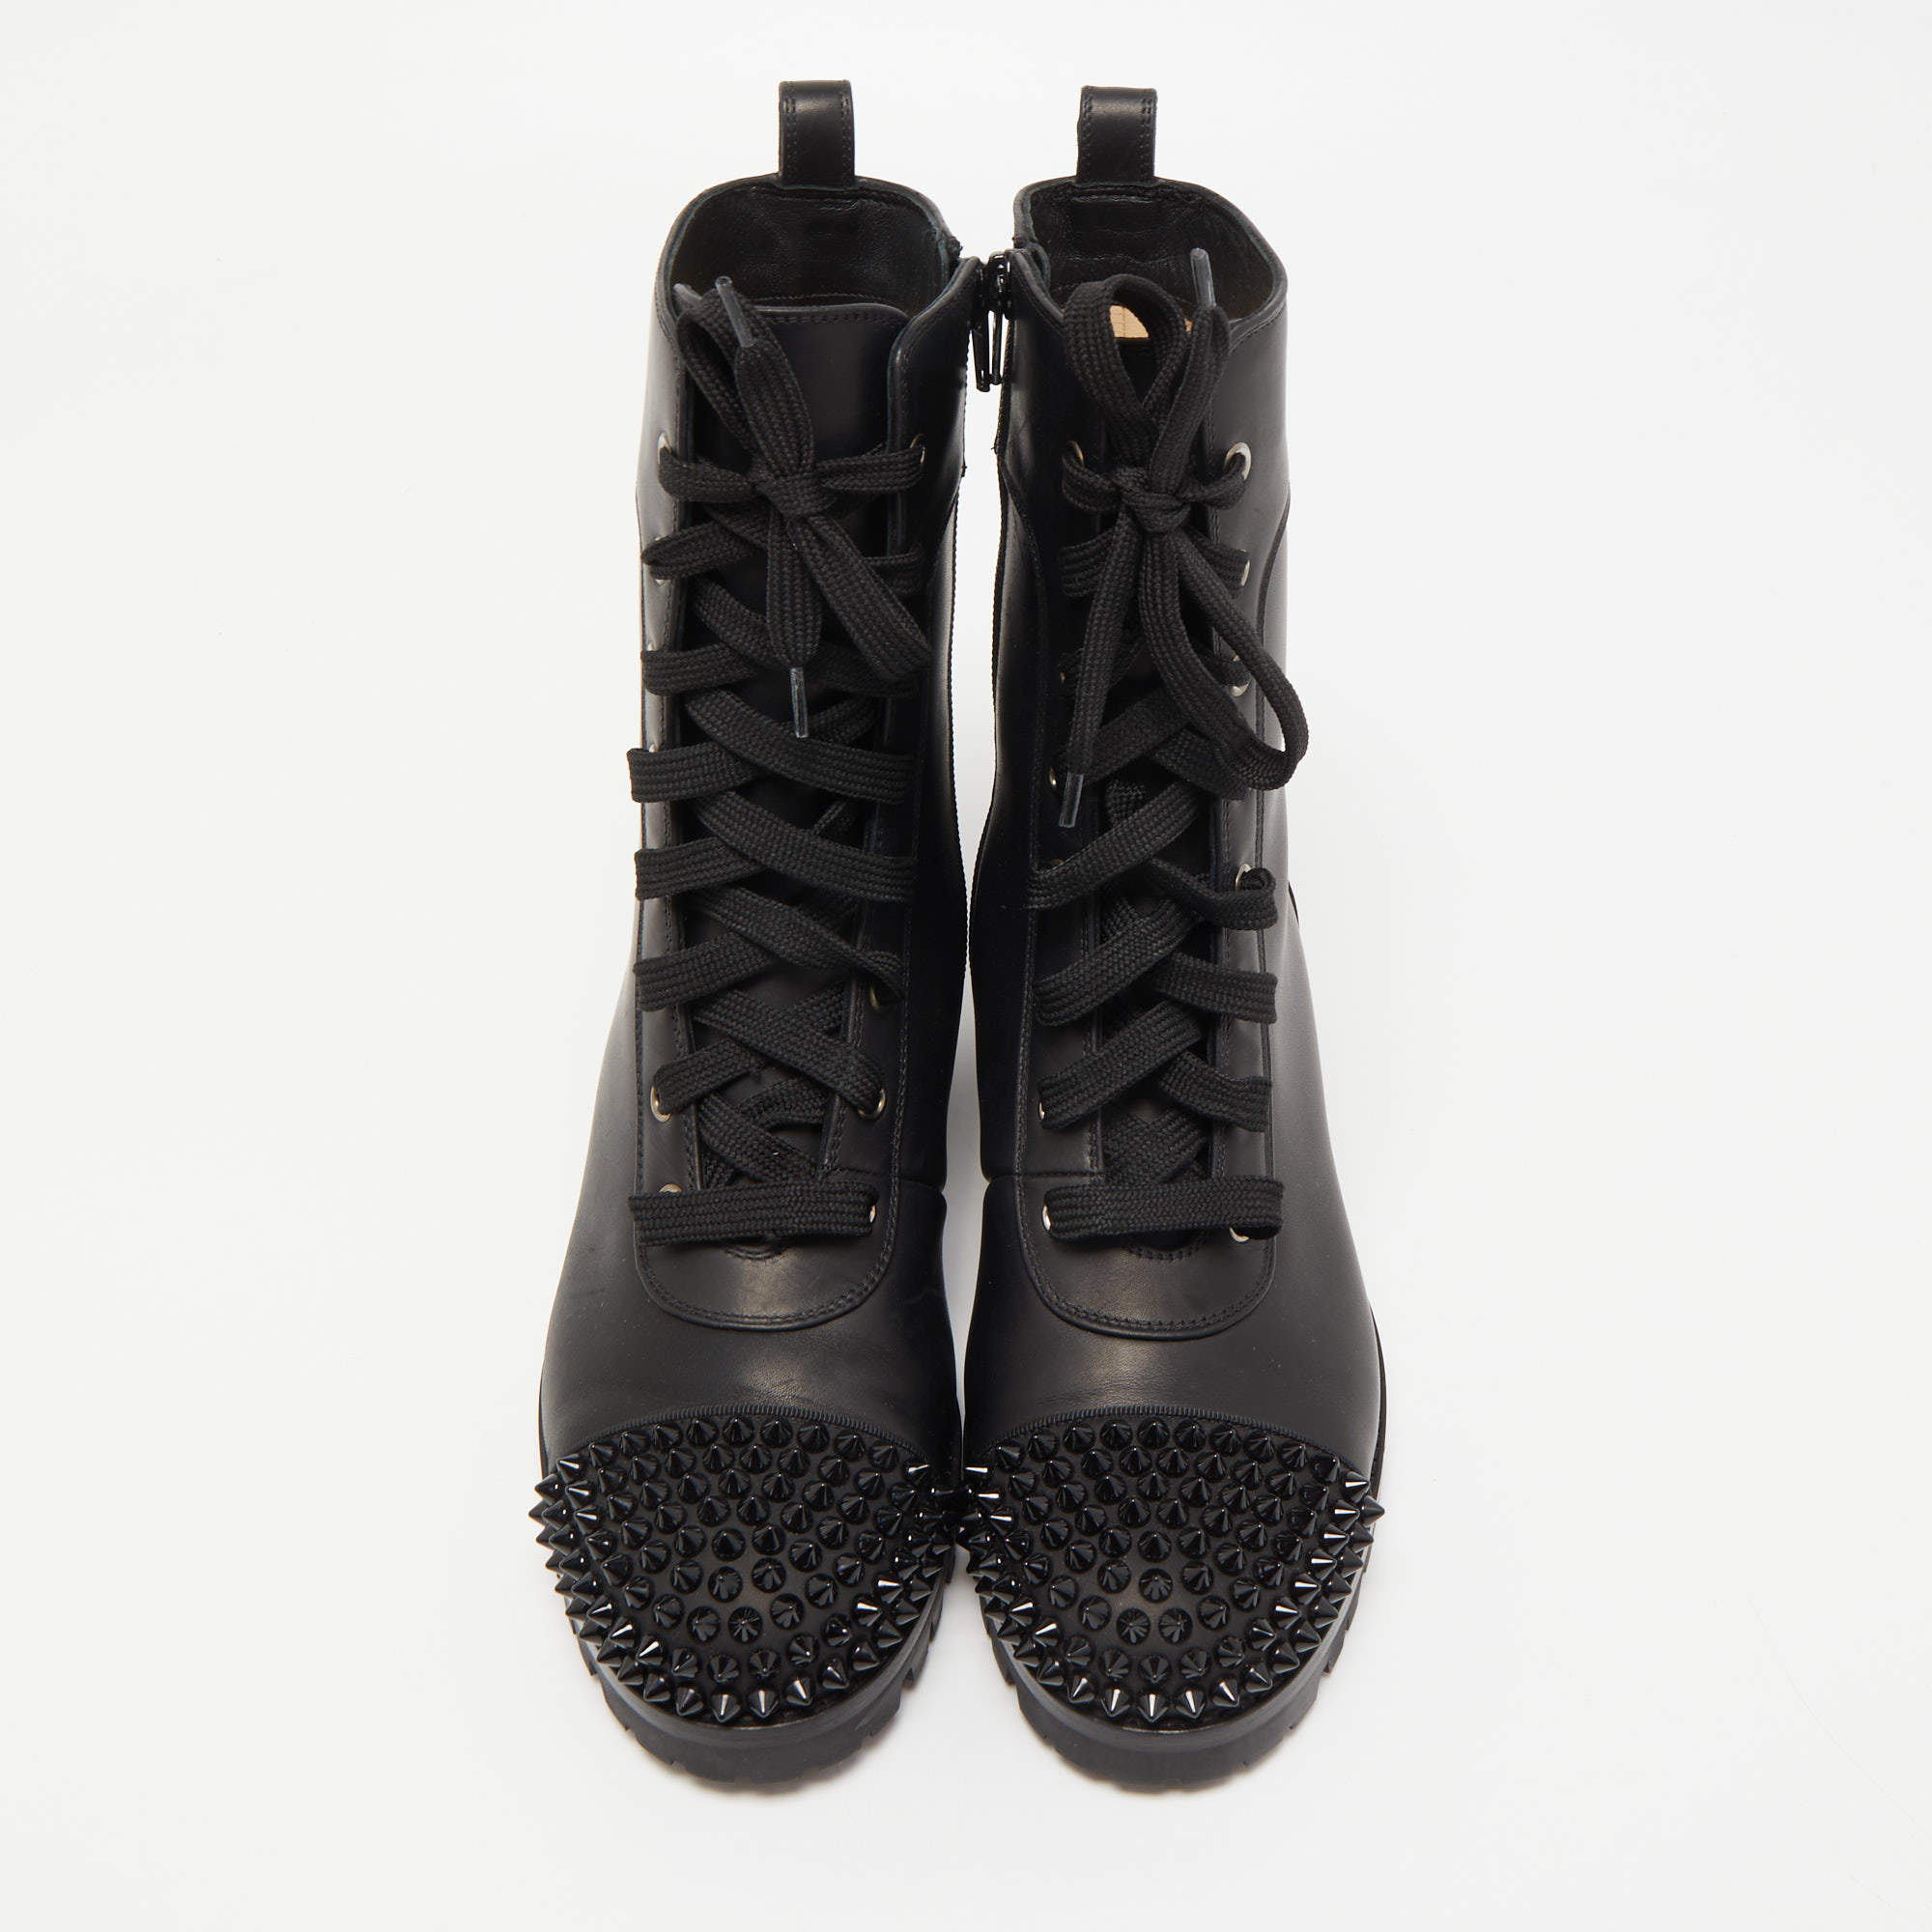 Christian Louboutin Authenticated TS Croc Ankle Boots